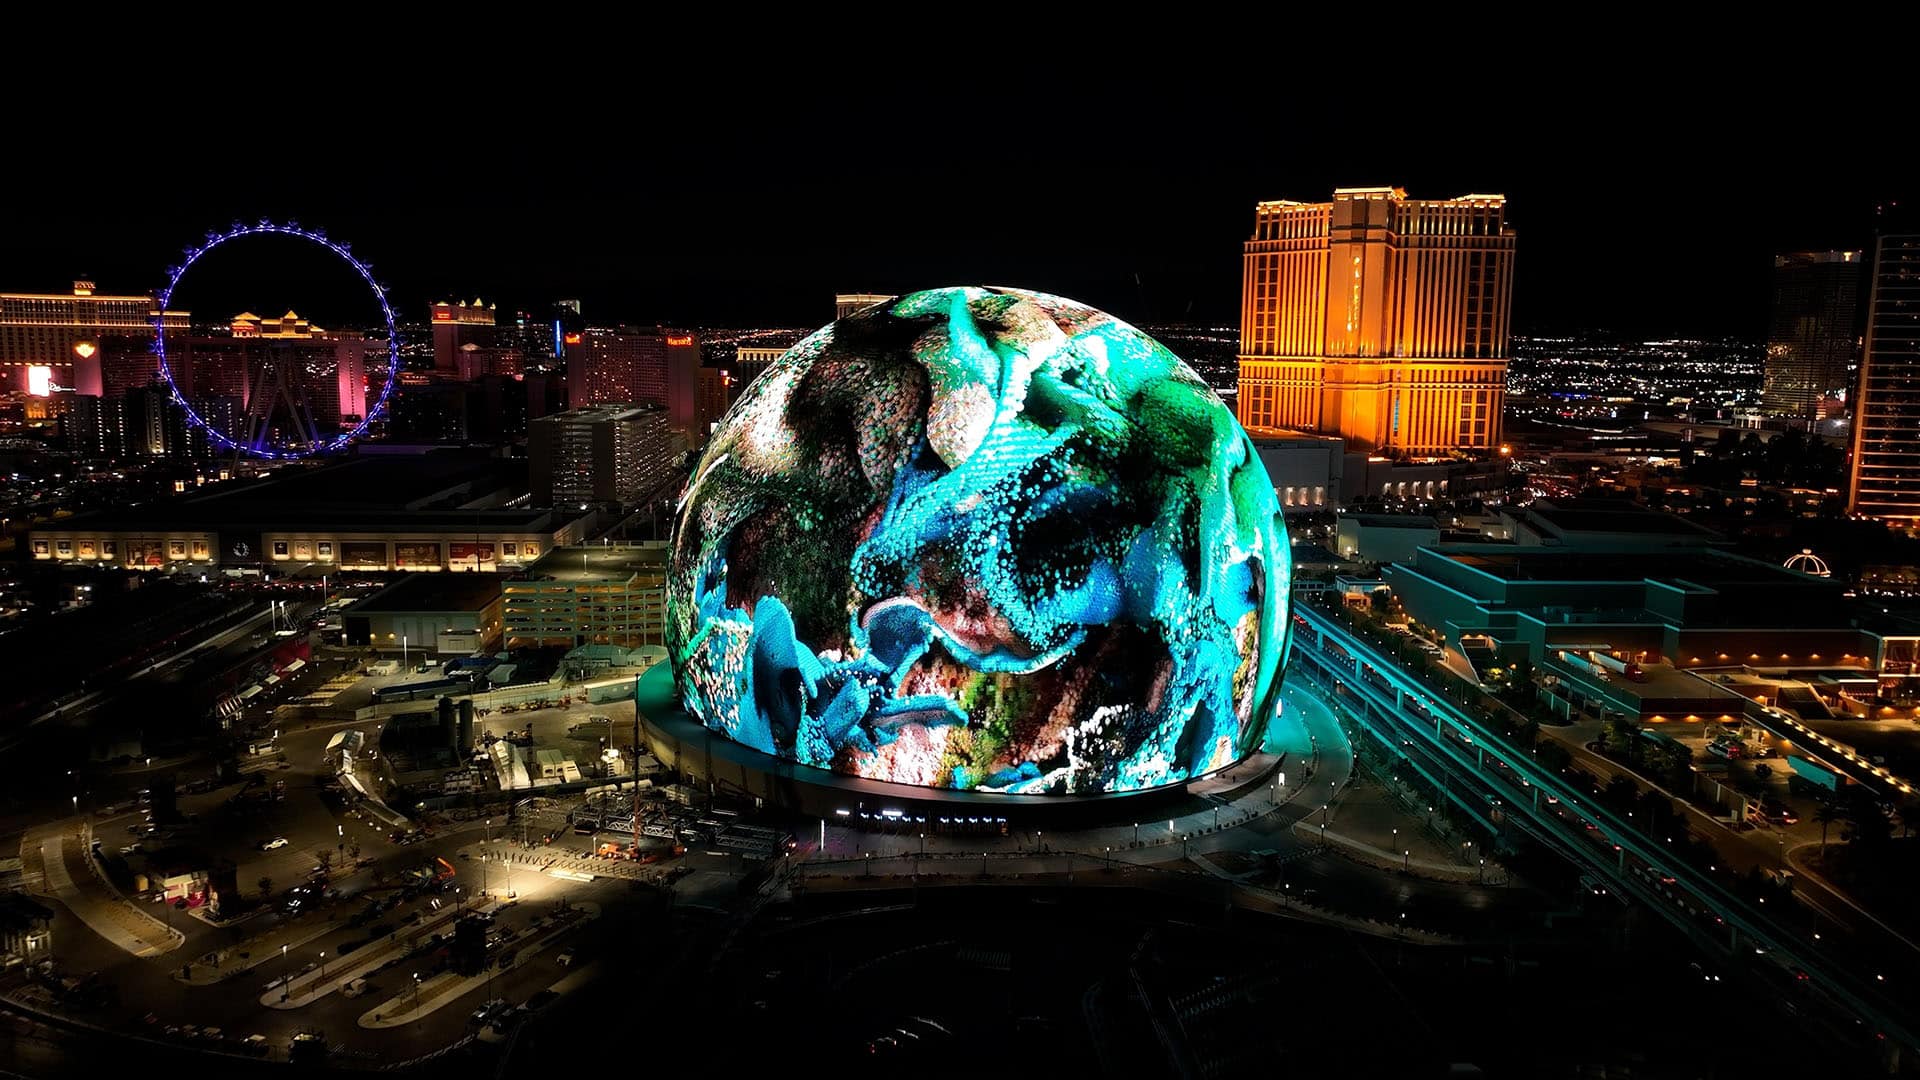 A night view of the MSG Sphere in Las Vegas illuminated with vibrant colored lighting that resembles an abstract underwater scene. Surrounding the Sphere are brightly lit buildings, including a prominent Ferris wheel on the left. The city lights twinkle in the background, showcasing creative digital persuasion at its finest.